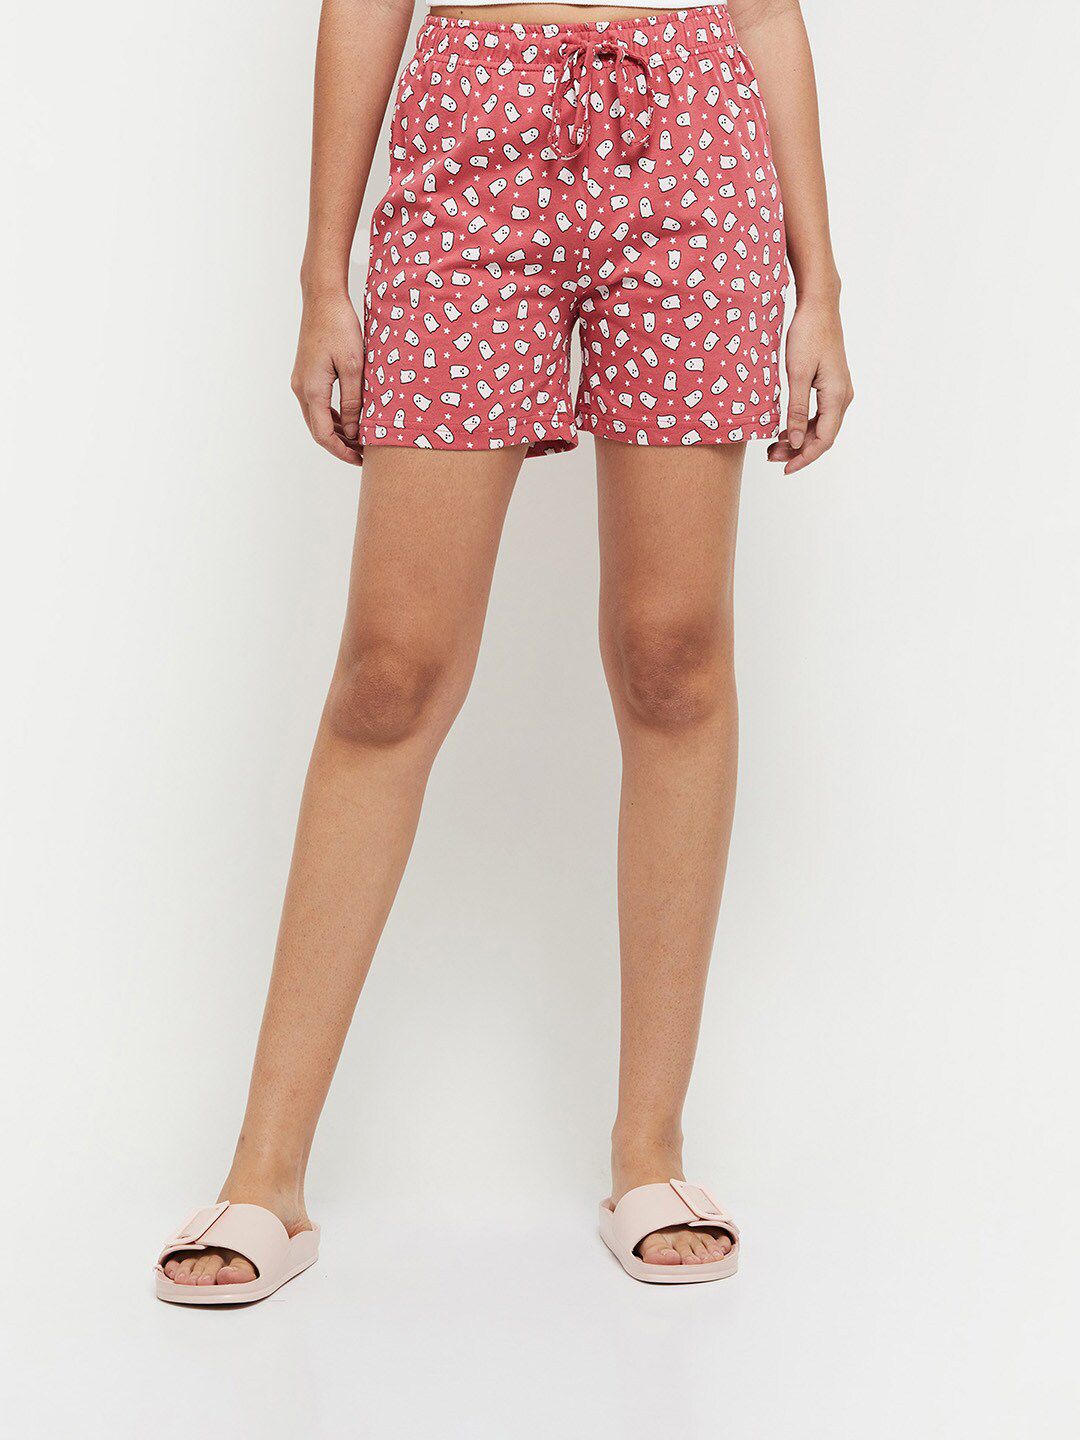 max Women Mauve & Off White Printed Lounge Shorts Price in India